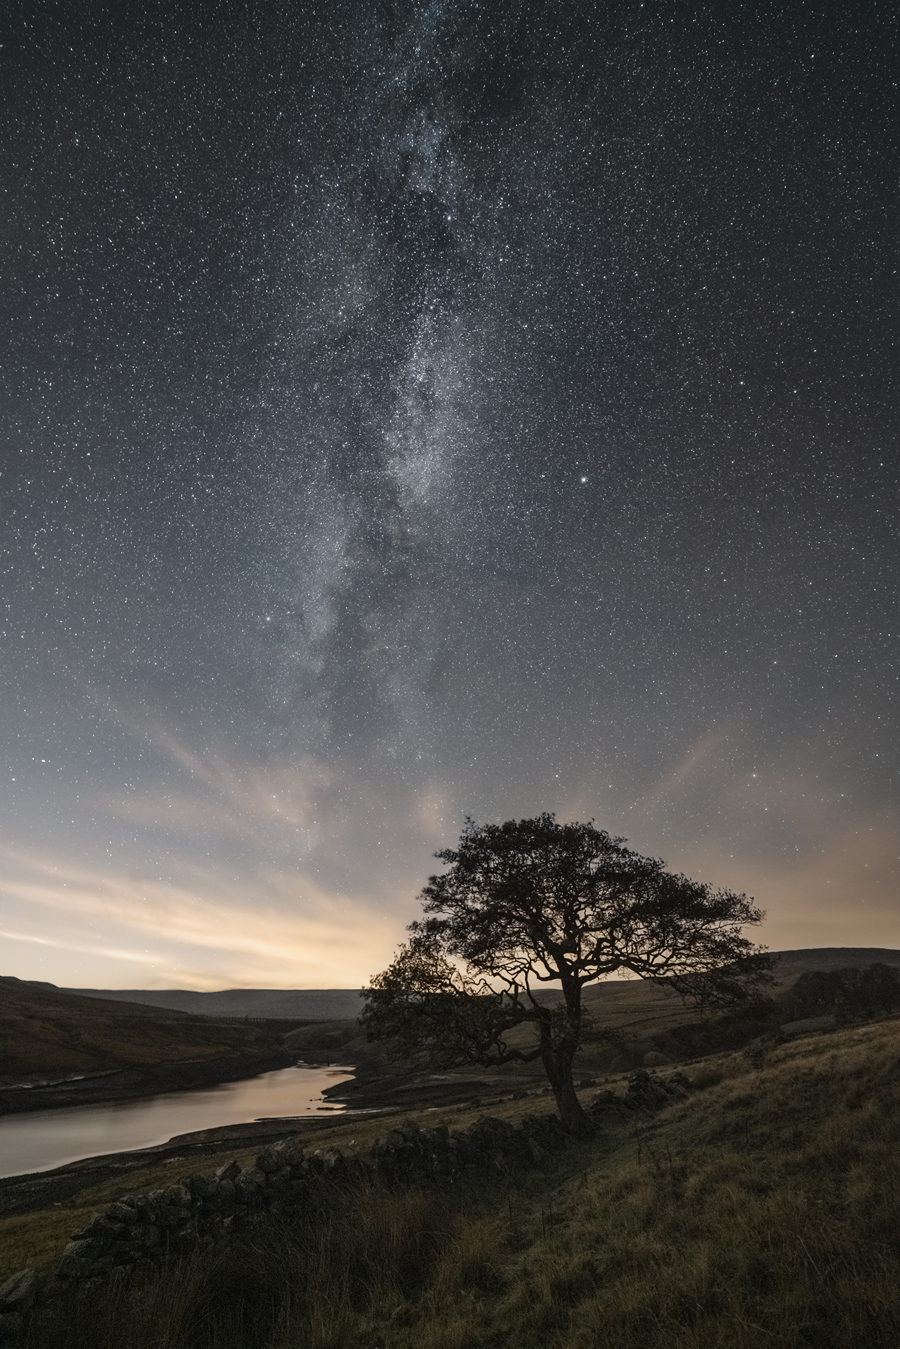 A solitary tree stands against a star-filled night sky, with the Milky Way visible as a bright, cloudy band stretching vertically. Below, gentle rolling hills and a serene lake add tranquillity to the scene, while a stone wall leads to the tree. 